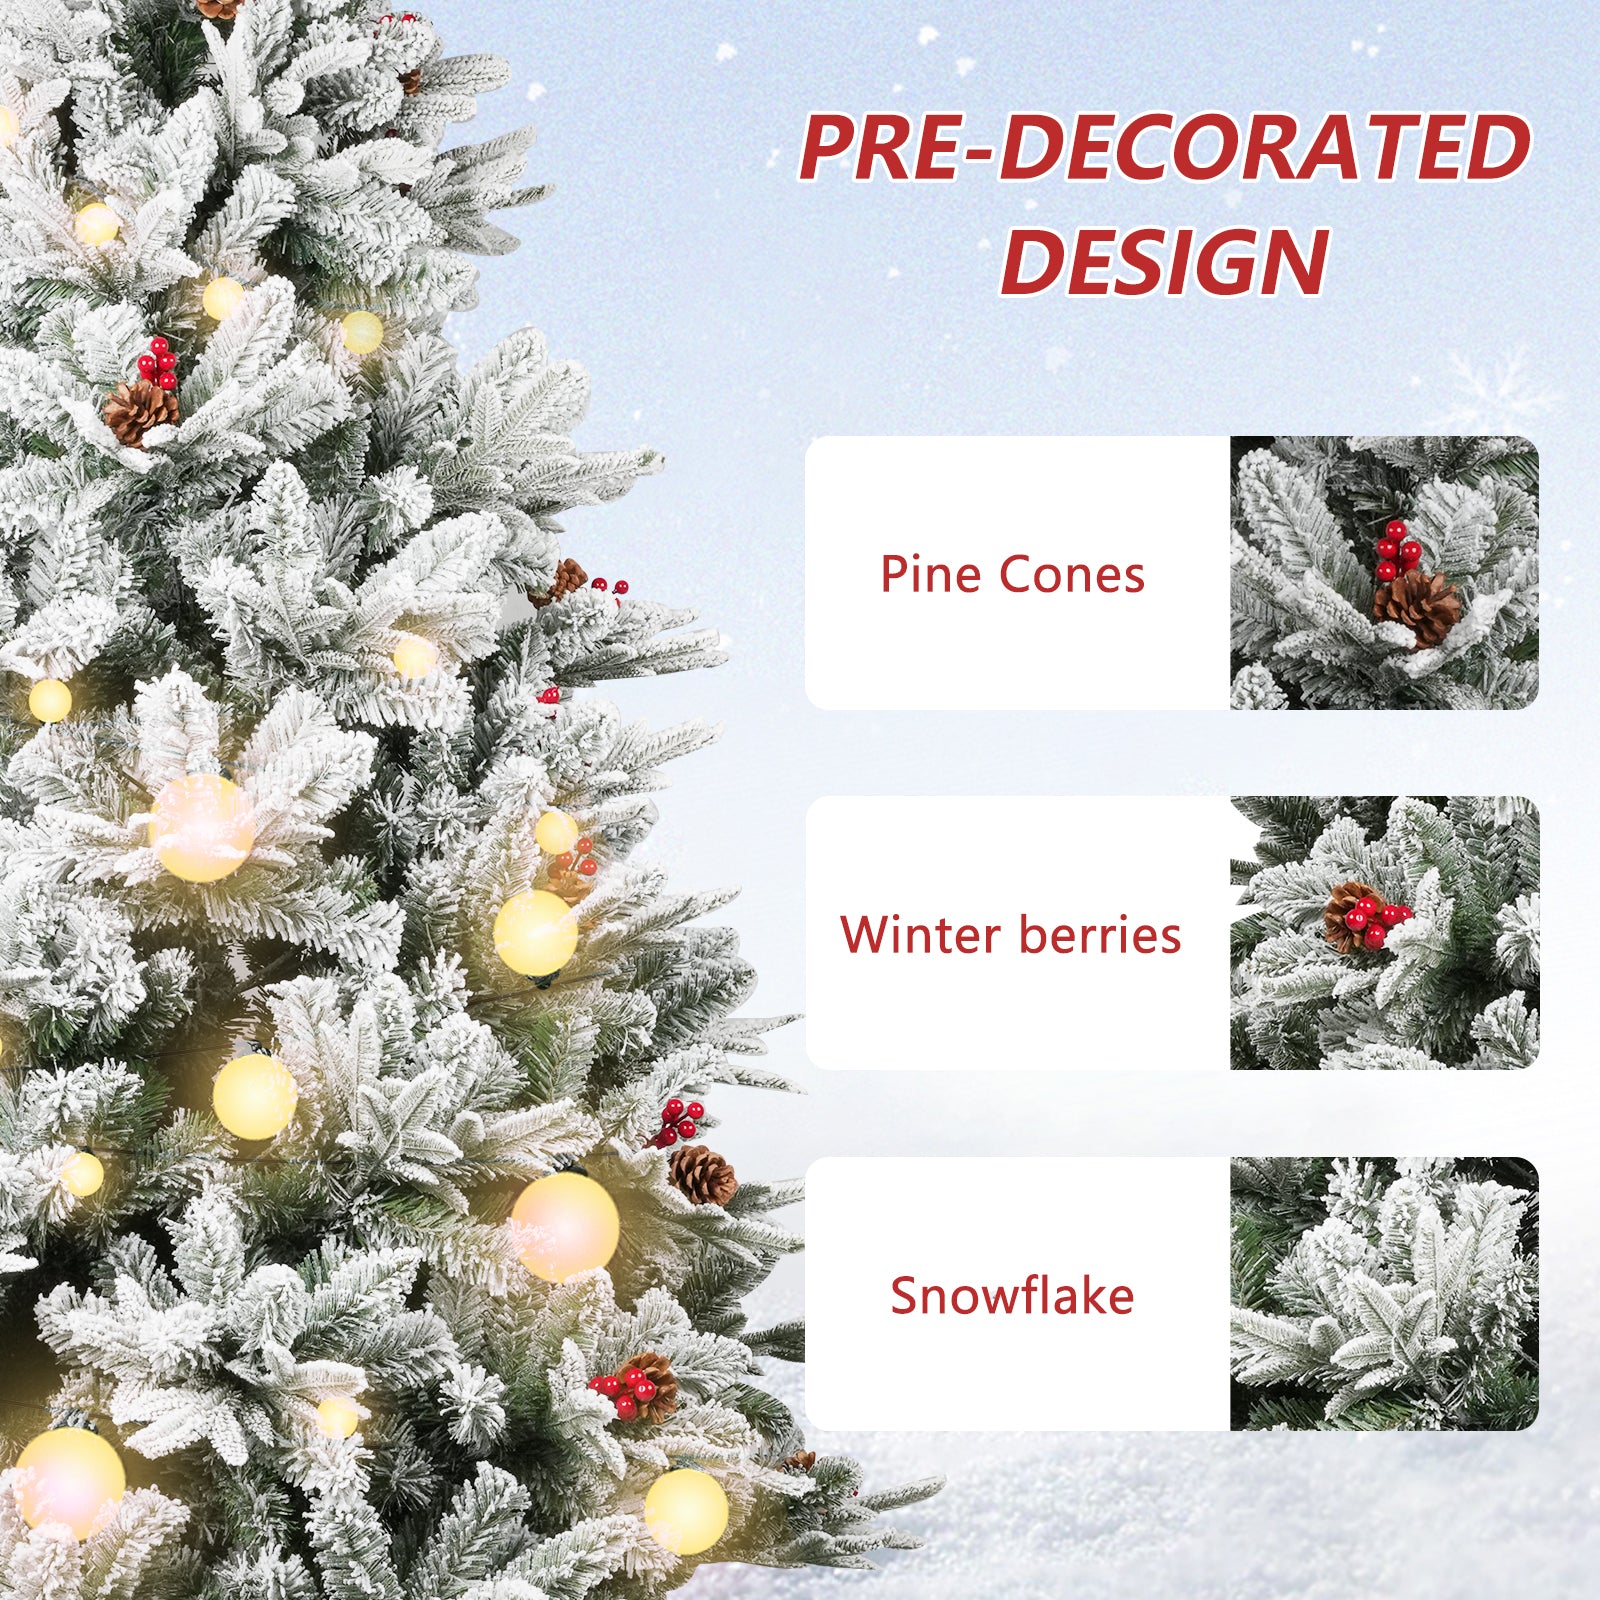 6.9' Artificial Christmas Tree Snow Flocked Xmas Tree with Pine Cones and Red Berries 1150 Branch Tips